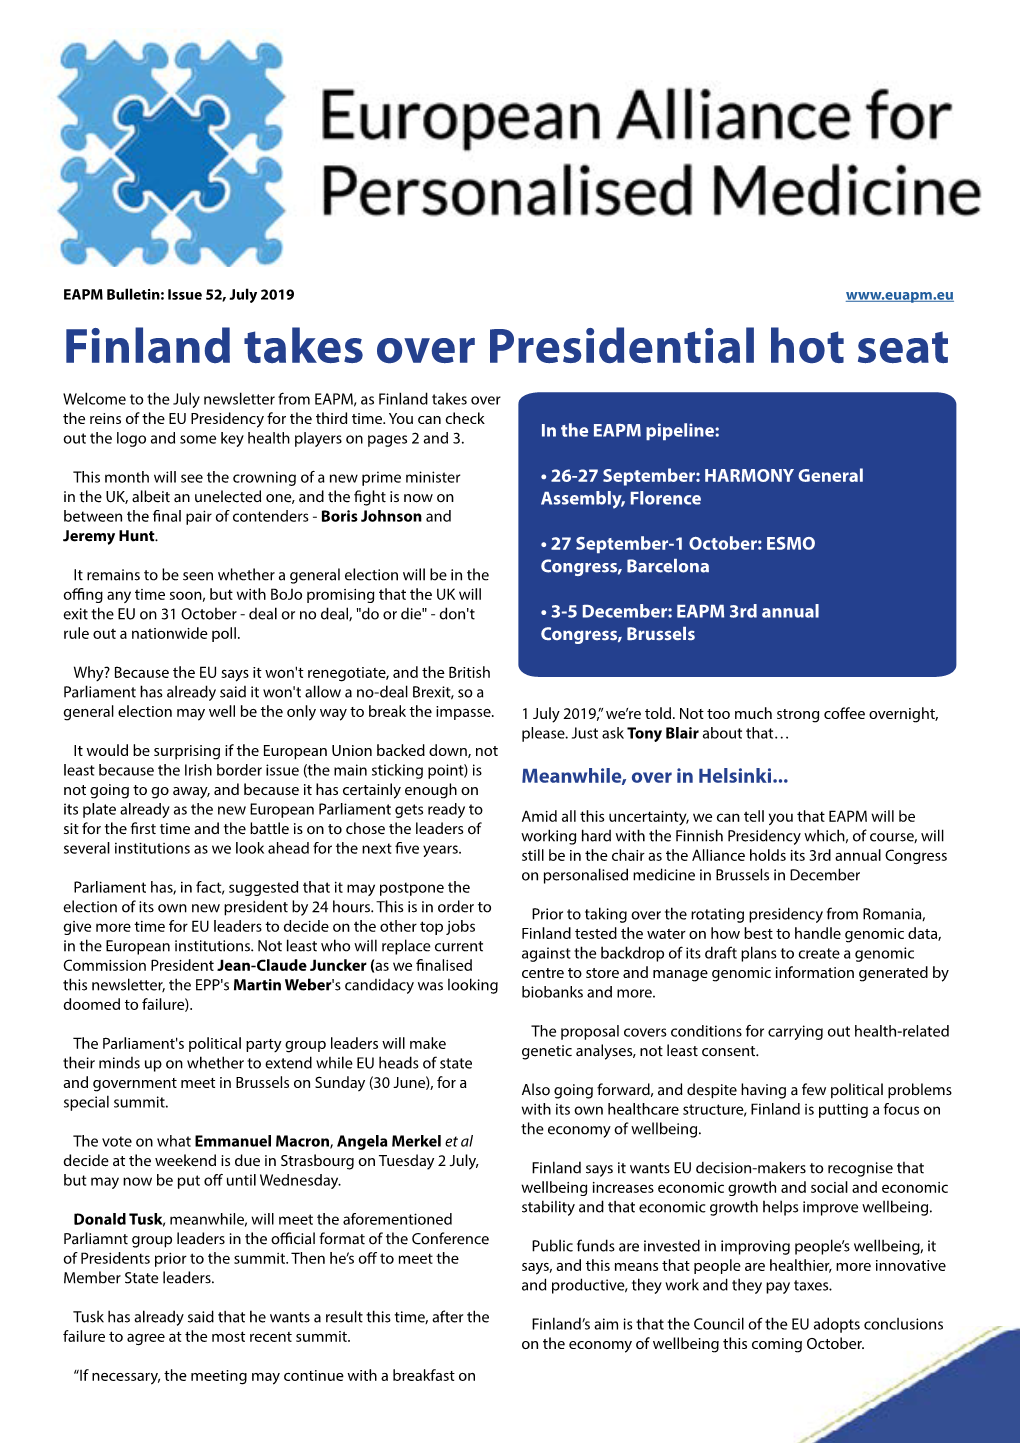 EAPM Bulletin: Issue 52, July 2019 Finland Takes Over Presidential Hot Seat